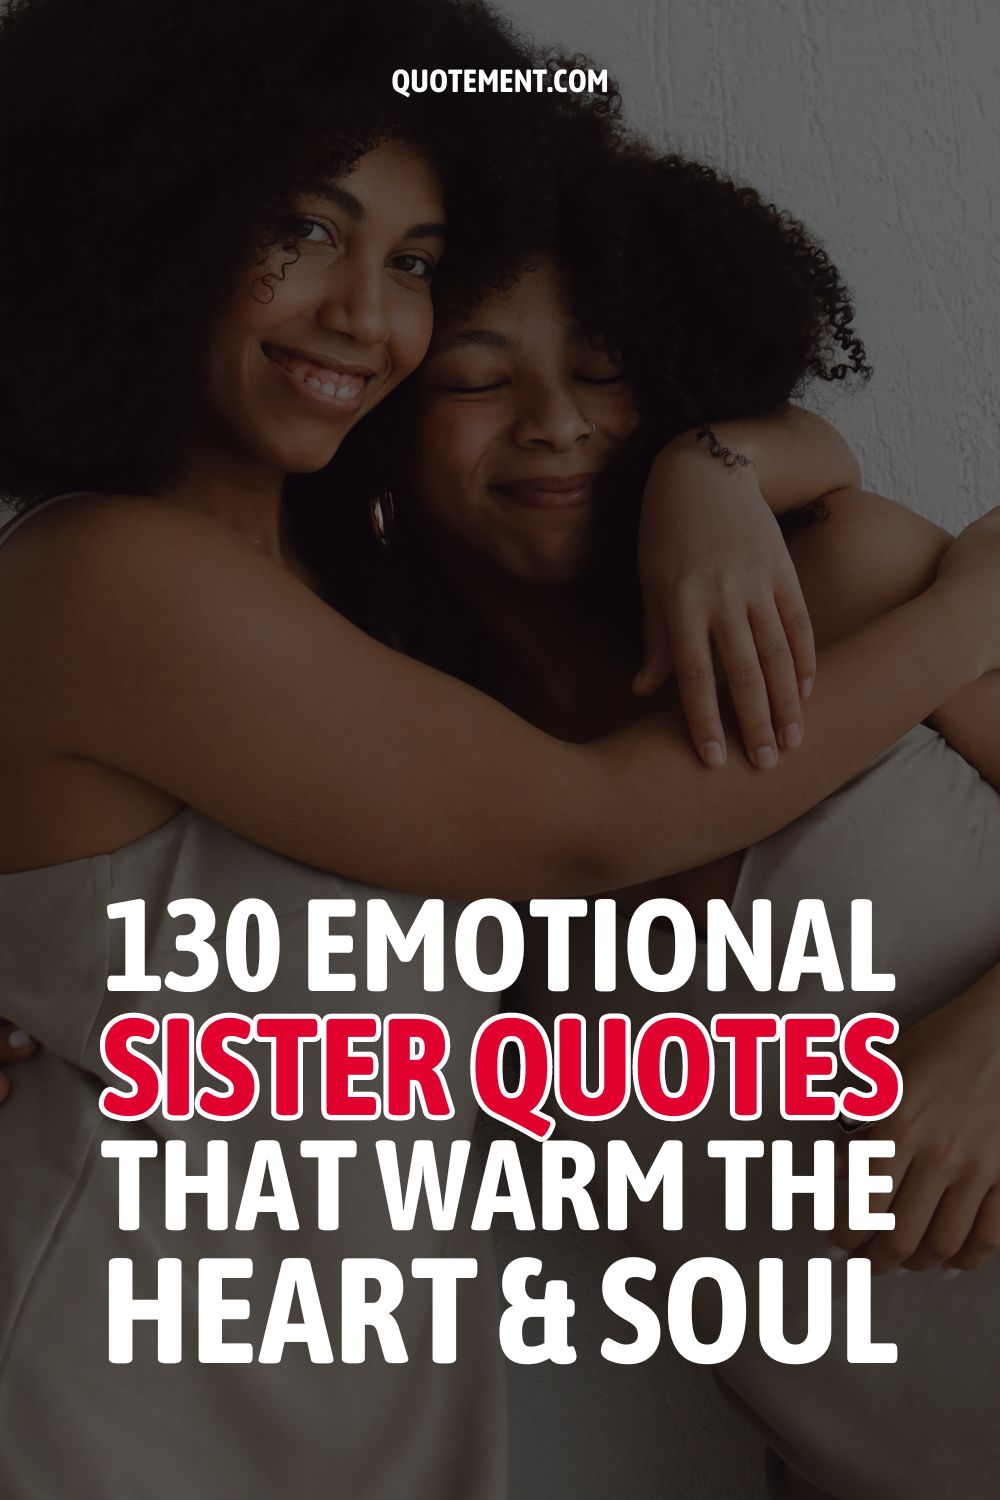 130 Emotional Sister Quotes That Warm The Heart And Soul
